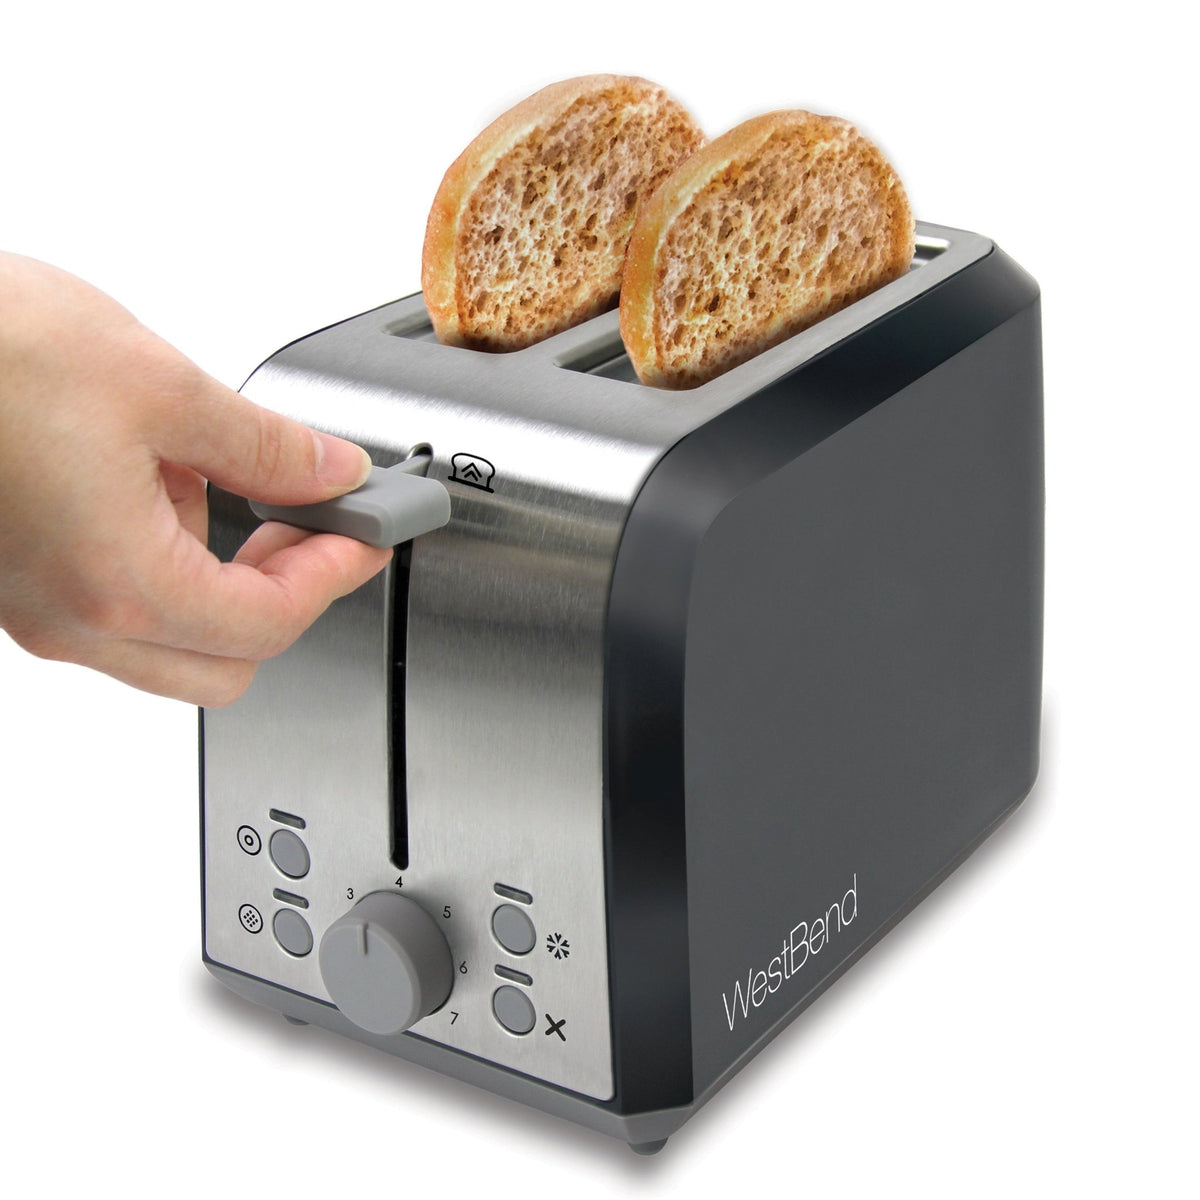 West Bend 2-Slice Toaster with Anti-Jam and Auto-Shut-Off, in